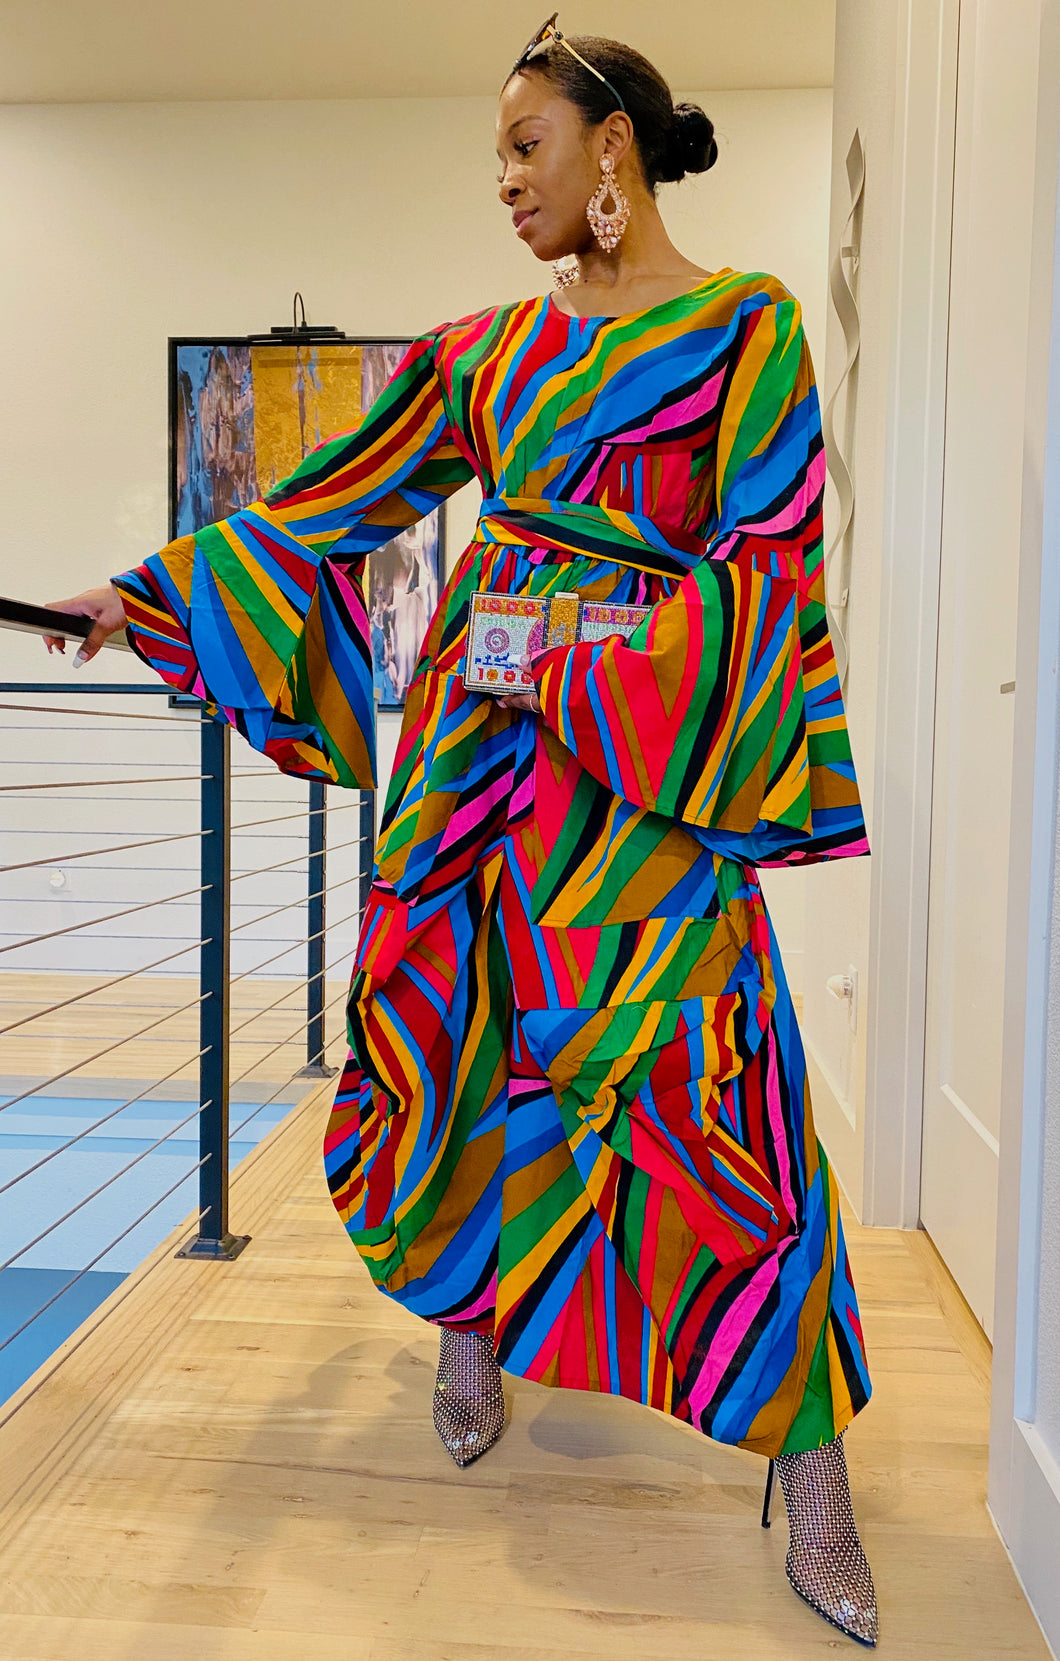 The “ Picasso “ dress